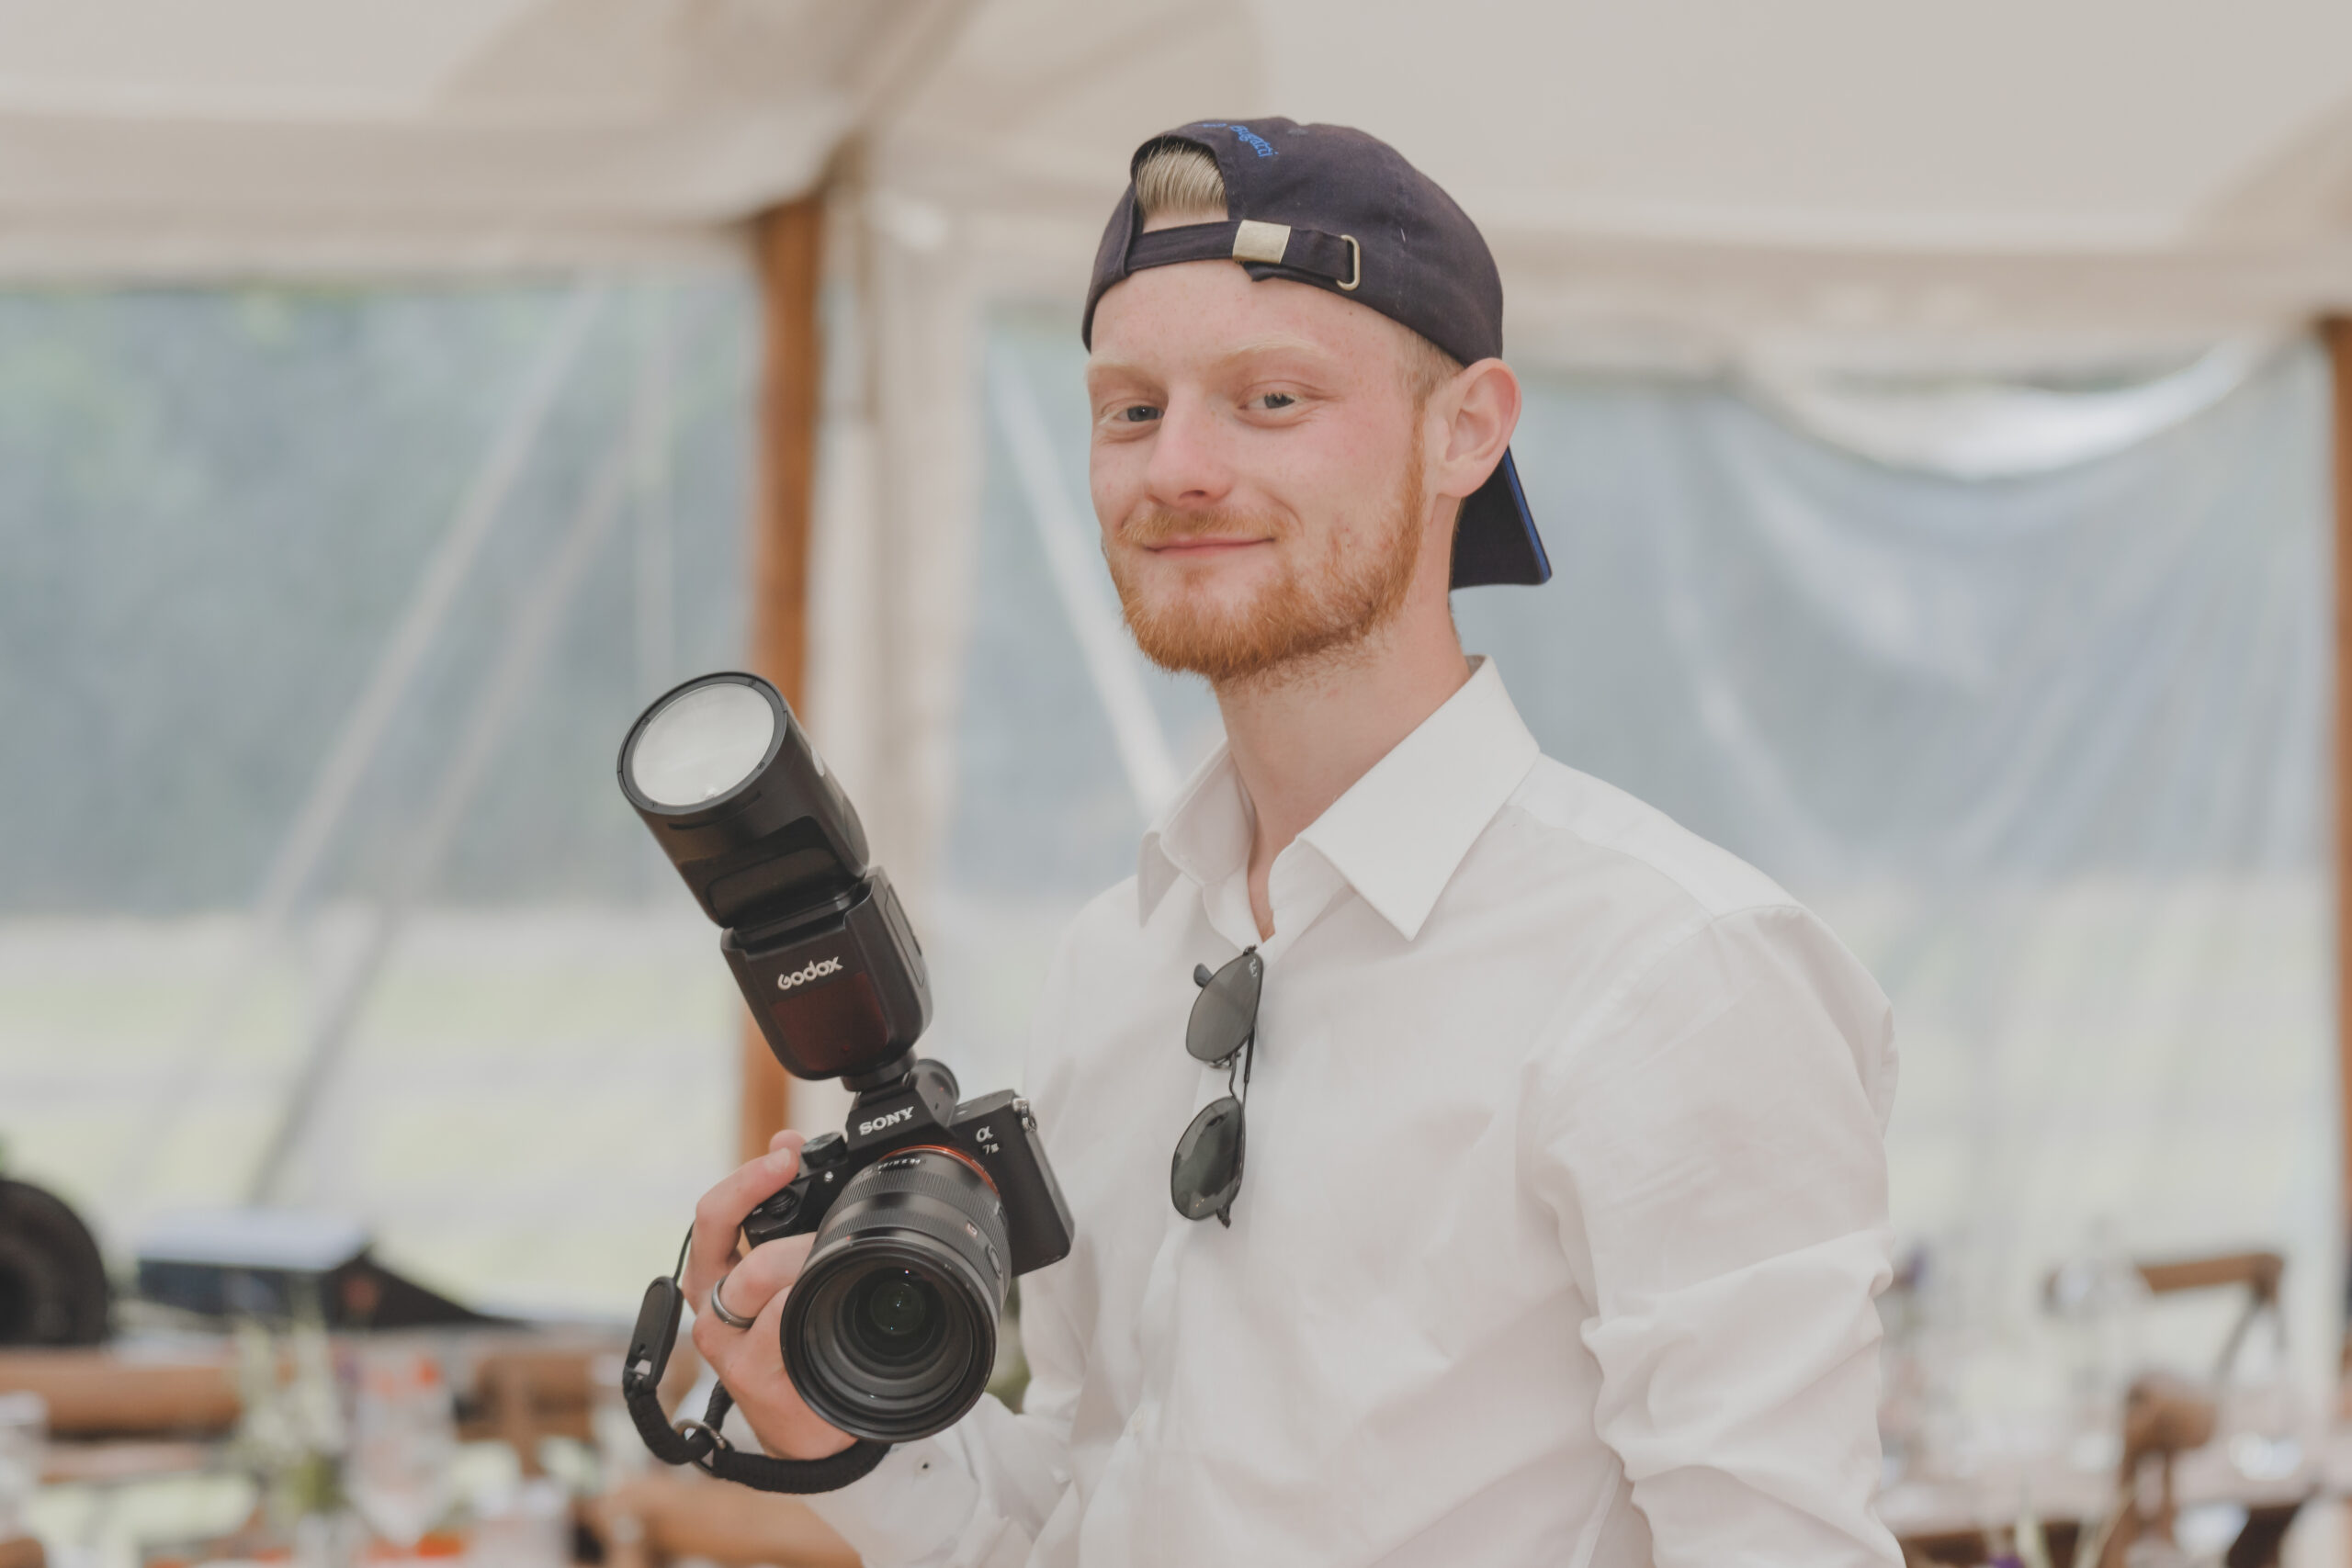 A man holding a camera in front of a tent.